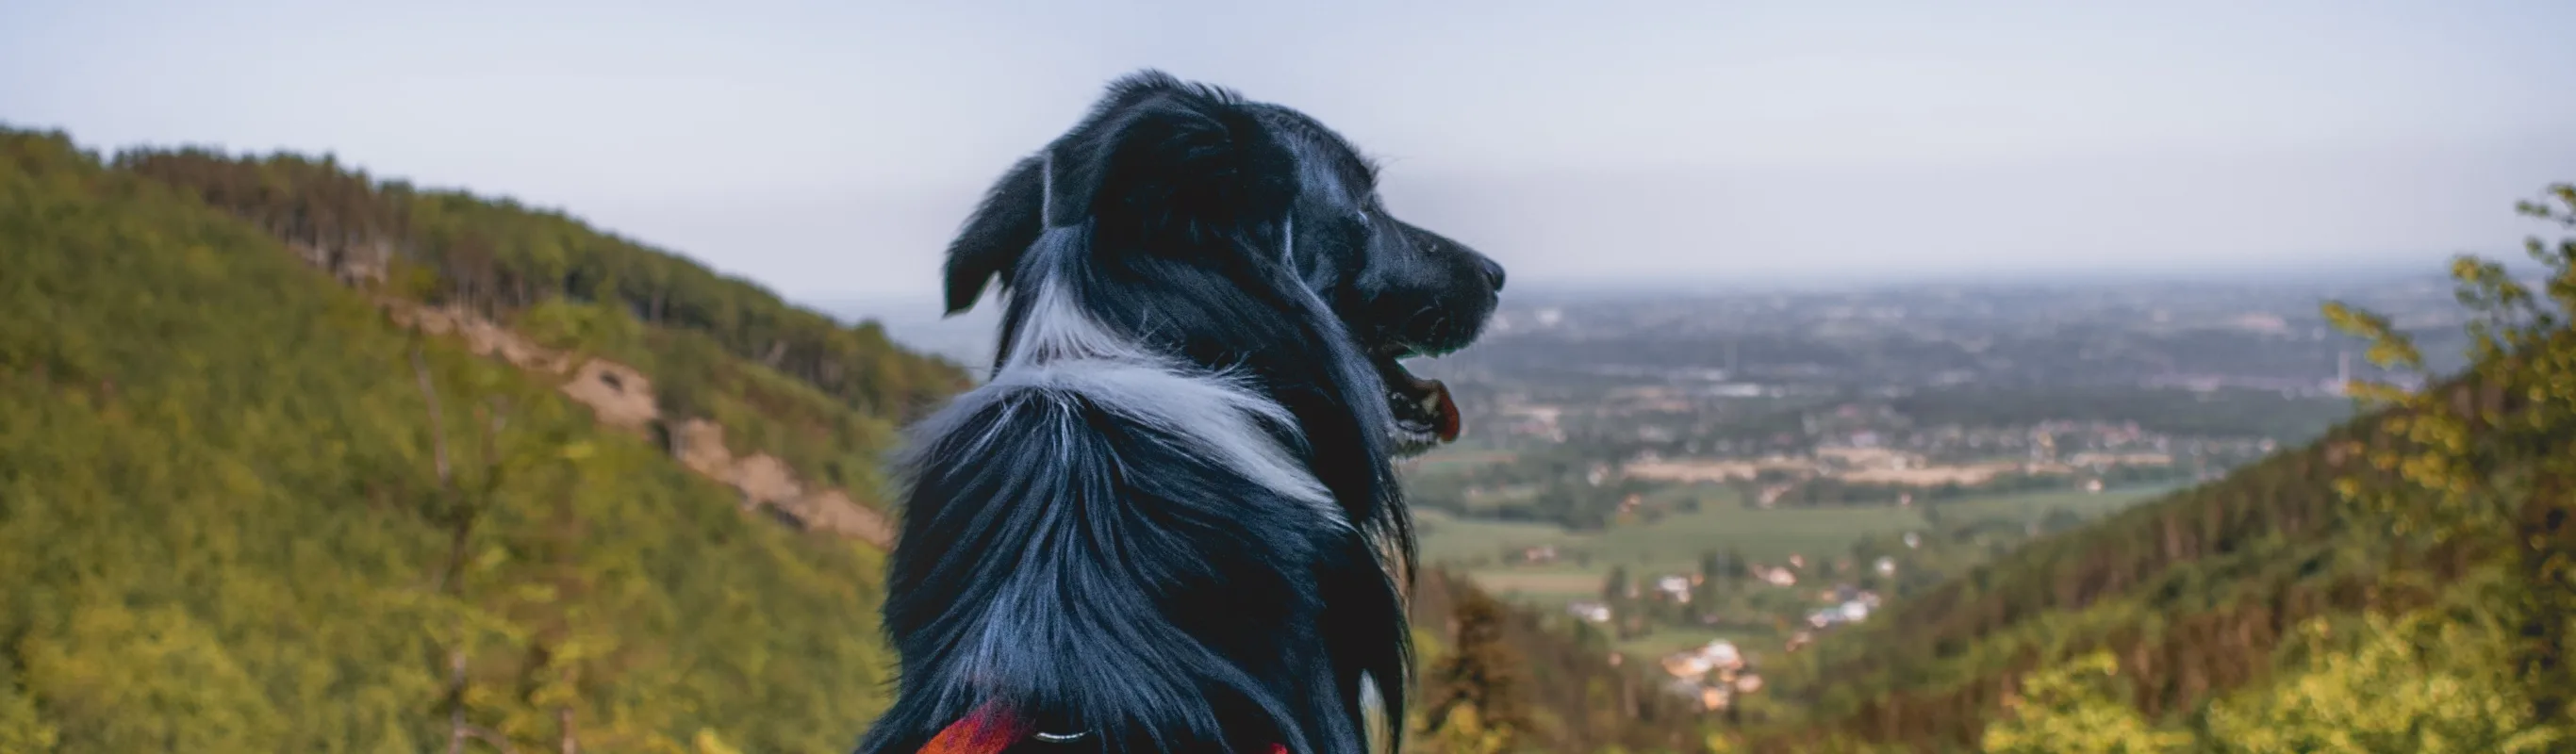 Dog overlooking scenery from mountain